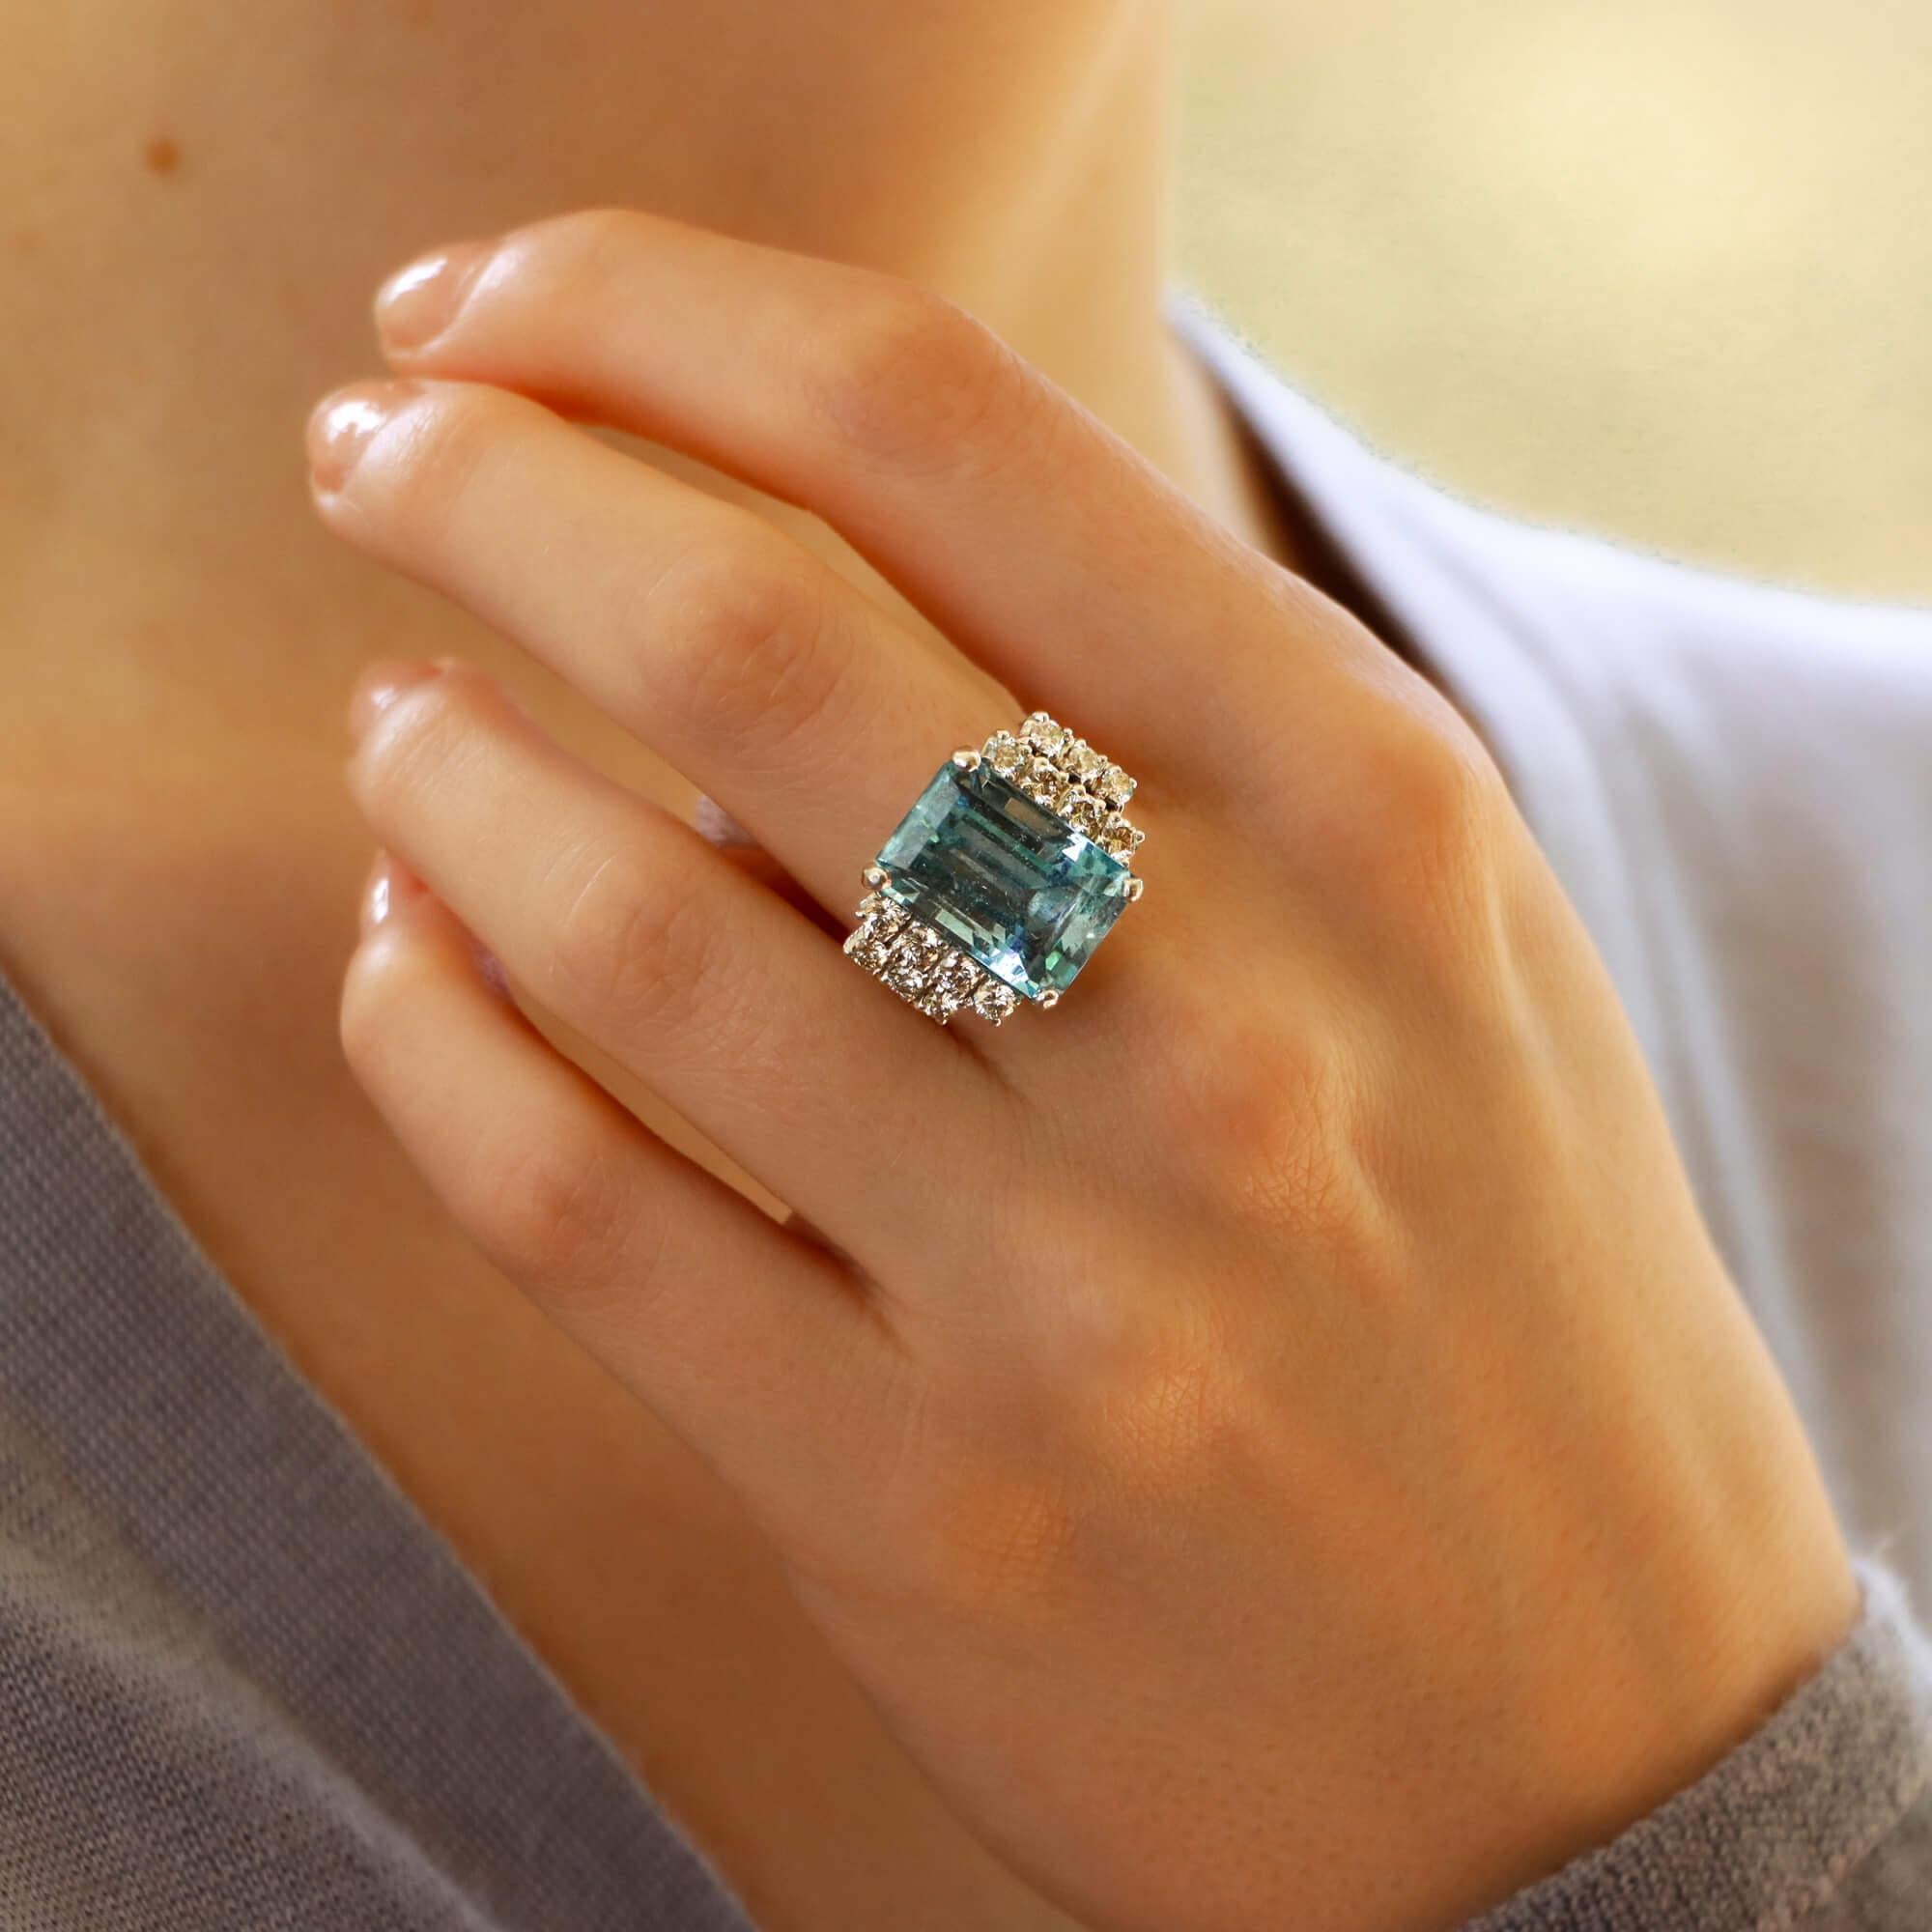 A striking Art Deco aquamarine and diamond cocktail ring set in 18k white gold.

This beautiful piece is predominantly set with a sky blue colored emerald cut aquamarine which is four claw set to center. To each side of the aquamarine there are two